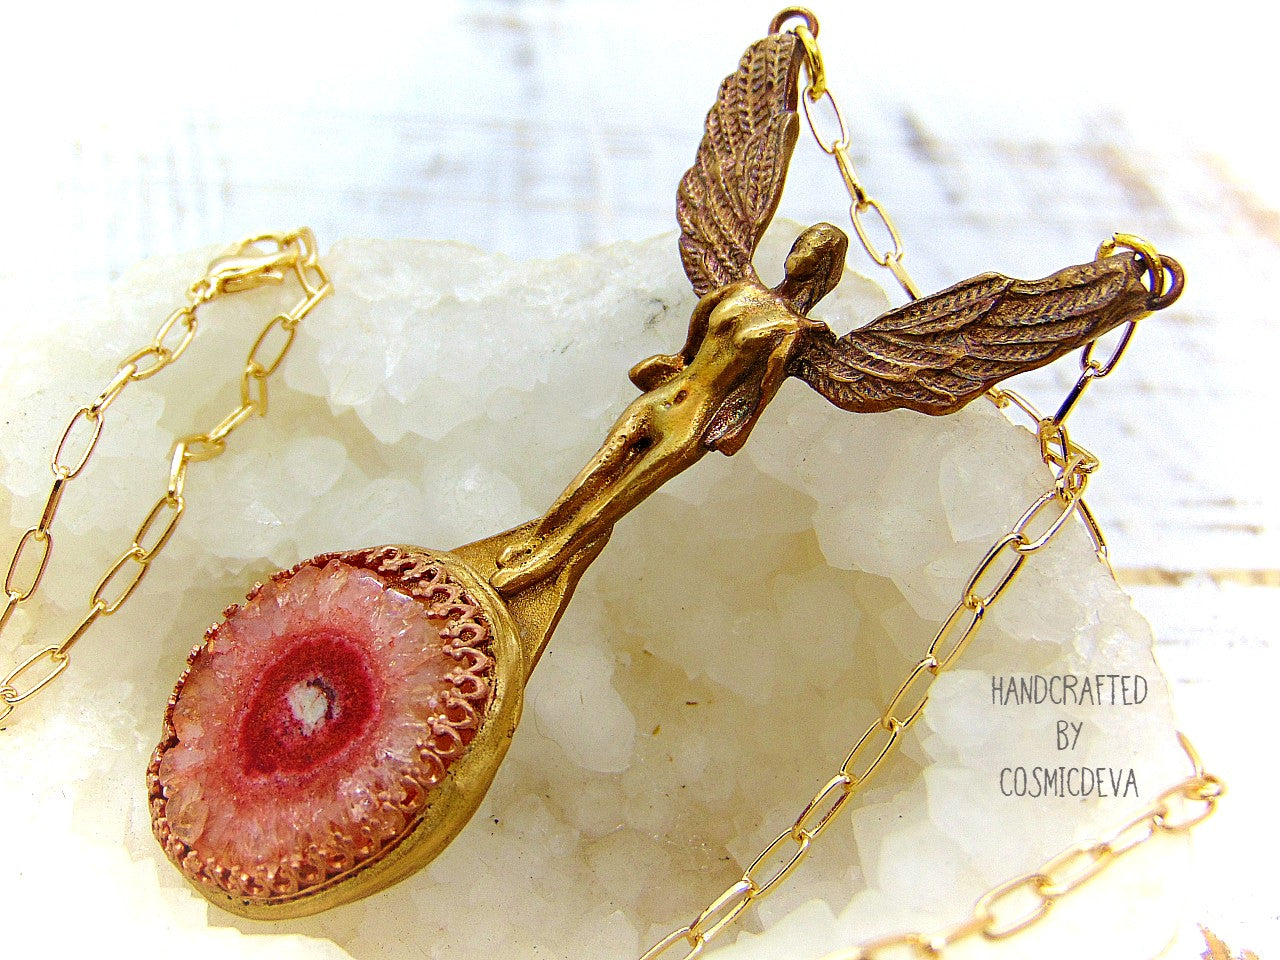 Be divinely inspired wearing this unique Archangel Chamuel pendant necklace. Handcrafted from gold bronze, it features a pink solar quartz bezel setting and is charged with the pink angel light ray of Kamael, the Archangel of peaceful relationships. Energize your spirit and look beautiful 